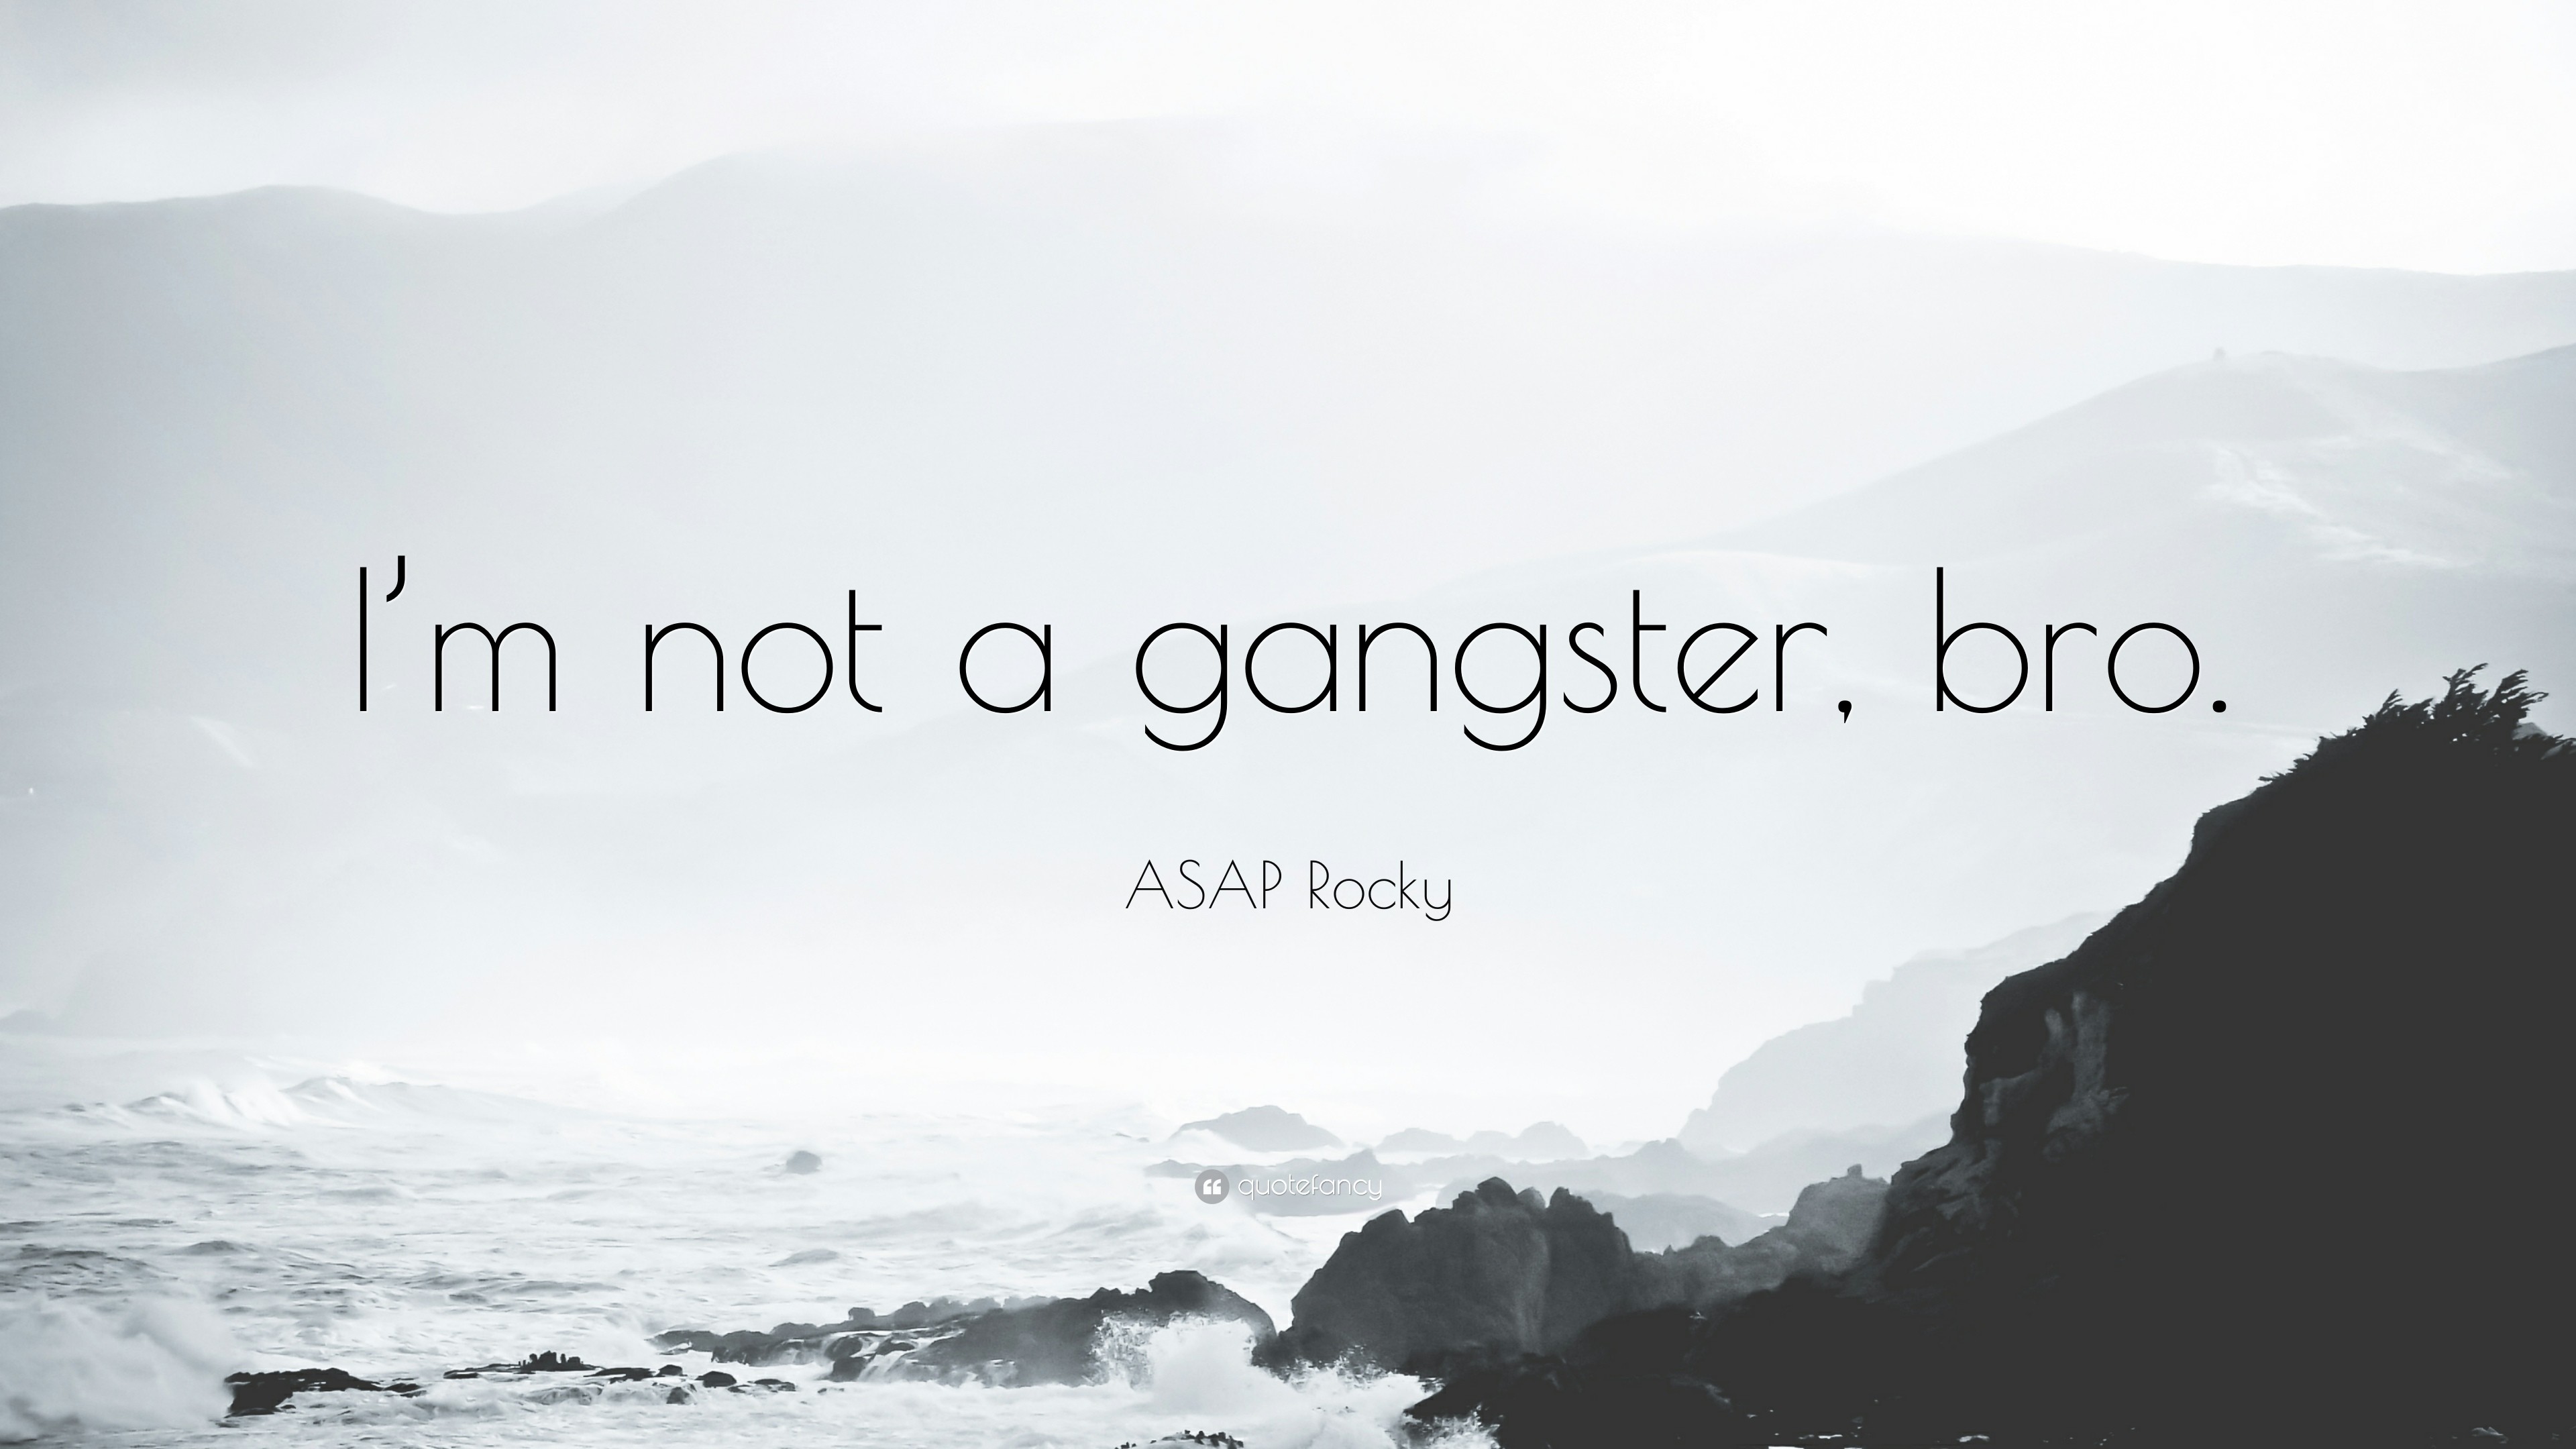 3840x2160 ASAP Rocky Quote: “I'm not a gangster, bro.”